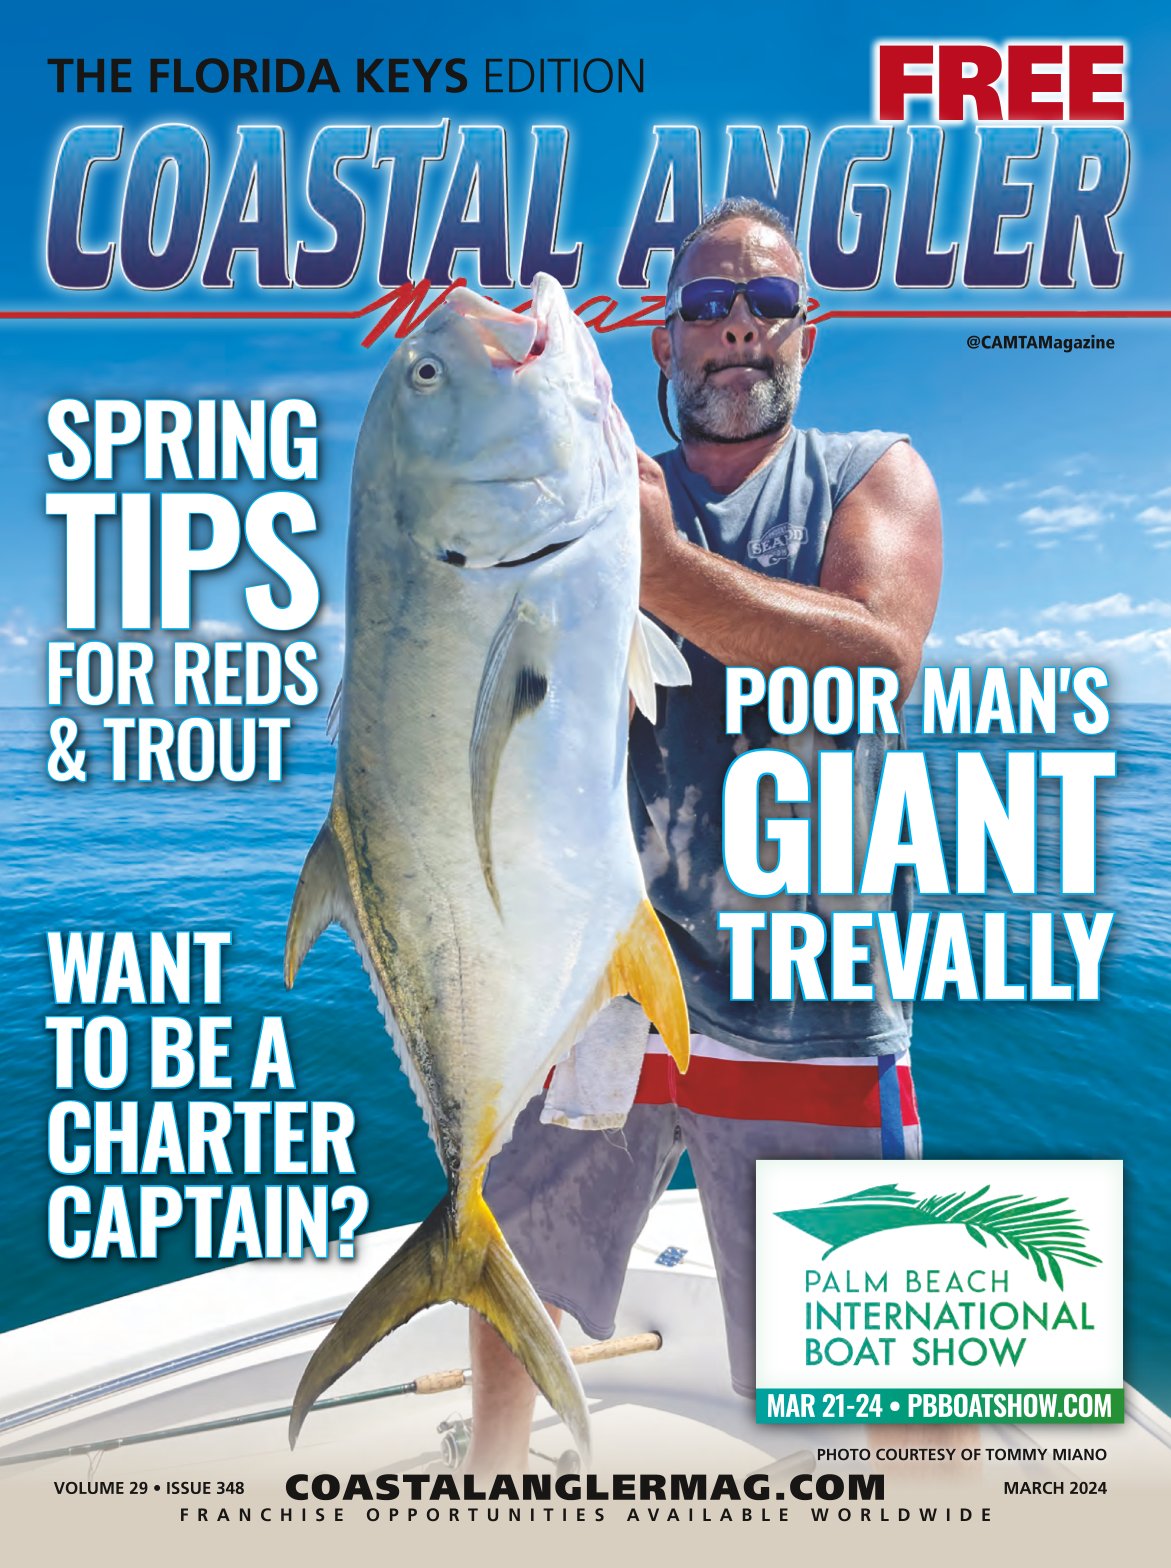 March 2024 Coastal Angler Magazine article written by Captain Quinlyn Haddon